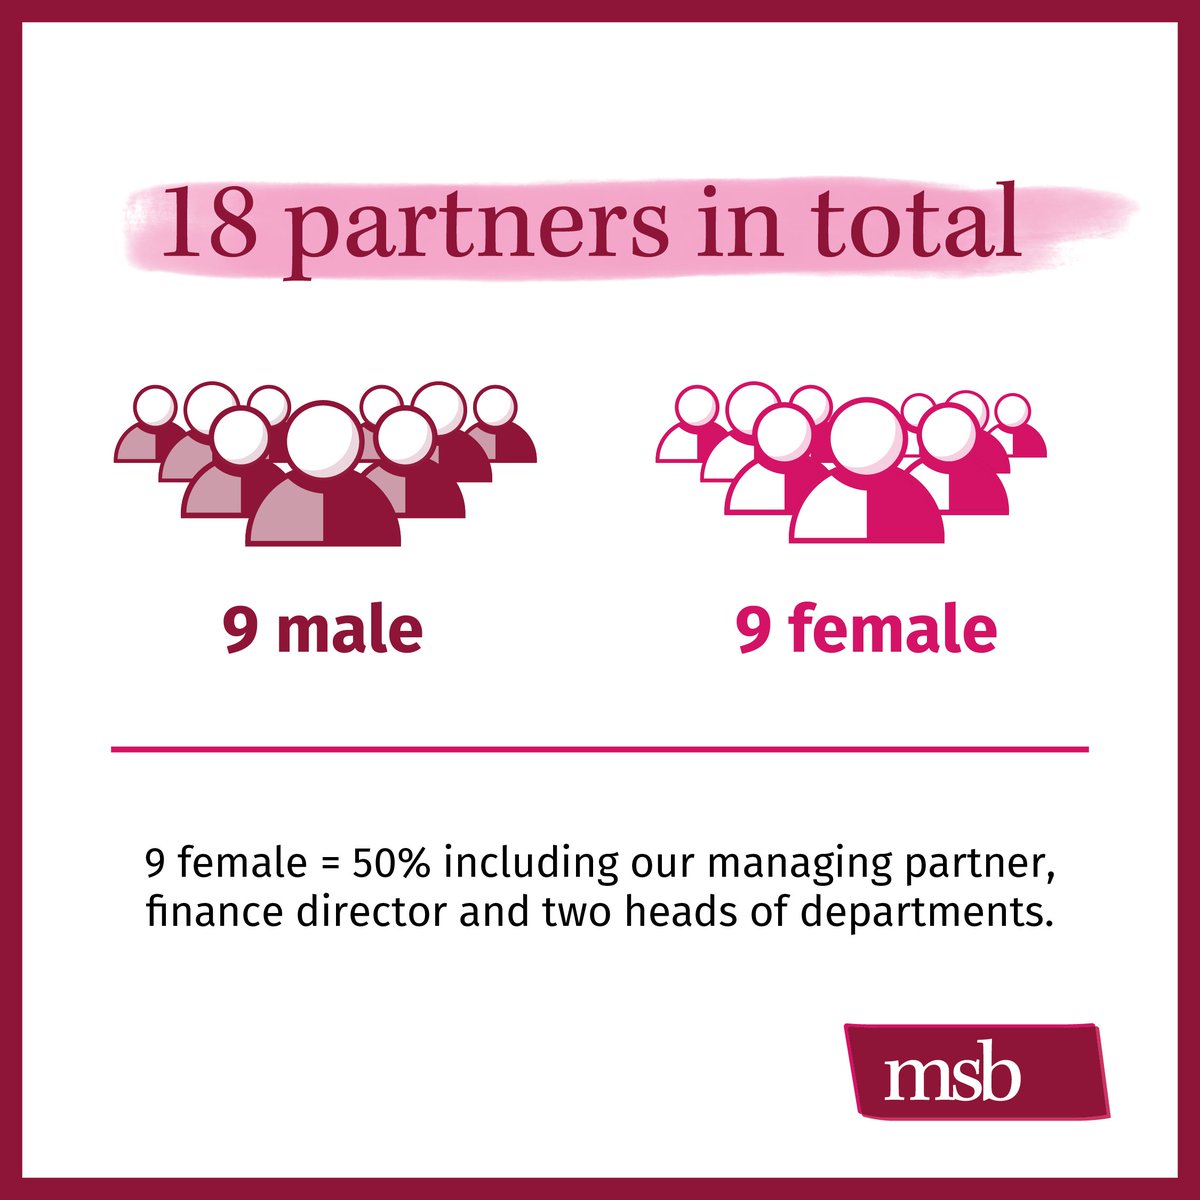 Continuing with our #InternationalWomensDay content, we wanted to share the breakdown of our Partners. At MSB, we work hard every day to create an inclusive and diverse working environment, where everyone, regardless of gender, age, sexuality, or race, can succeed. #IWD2023